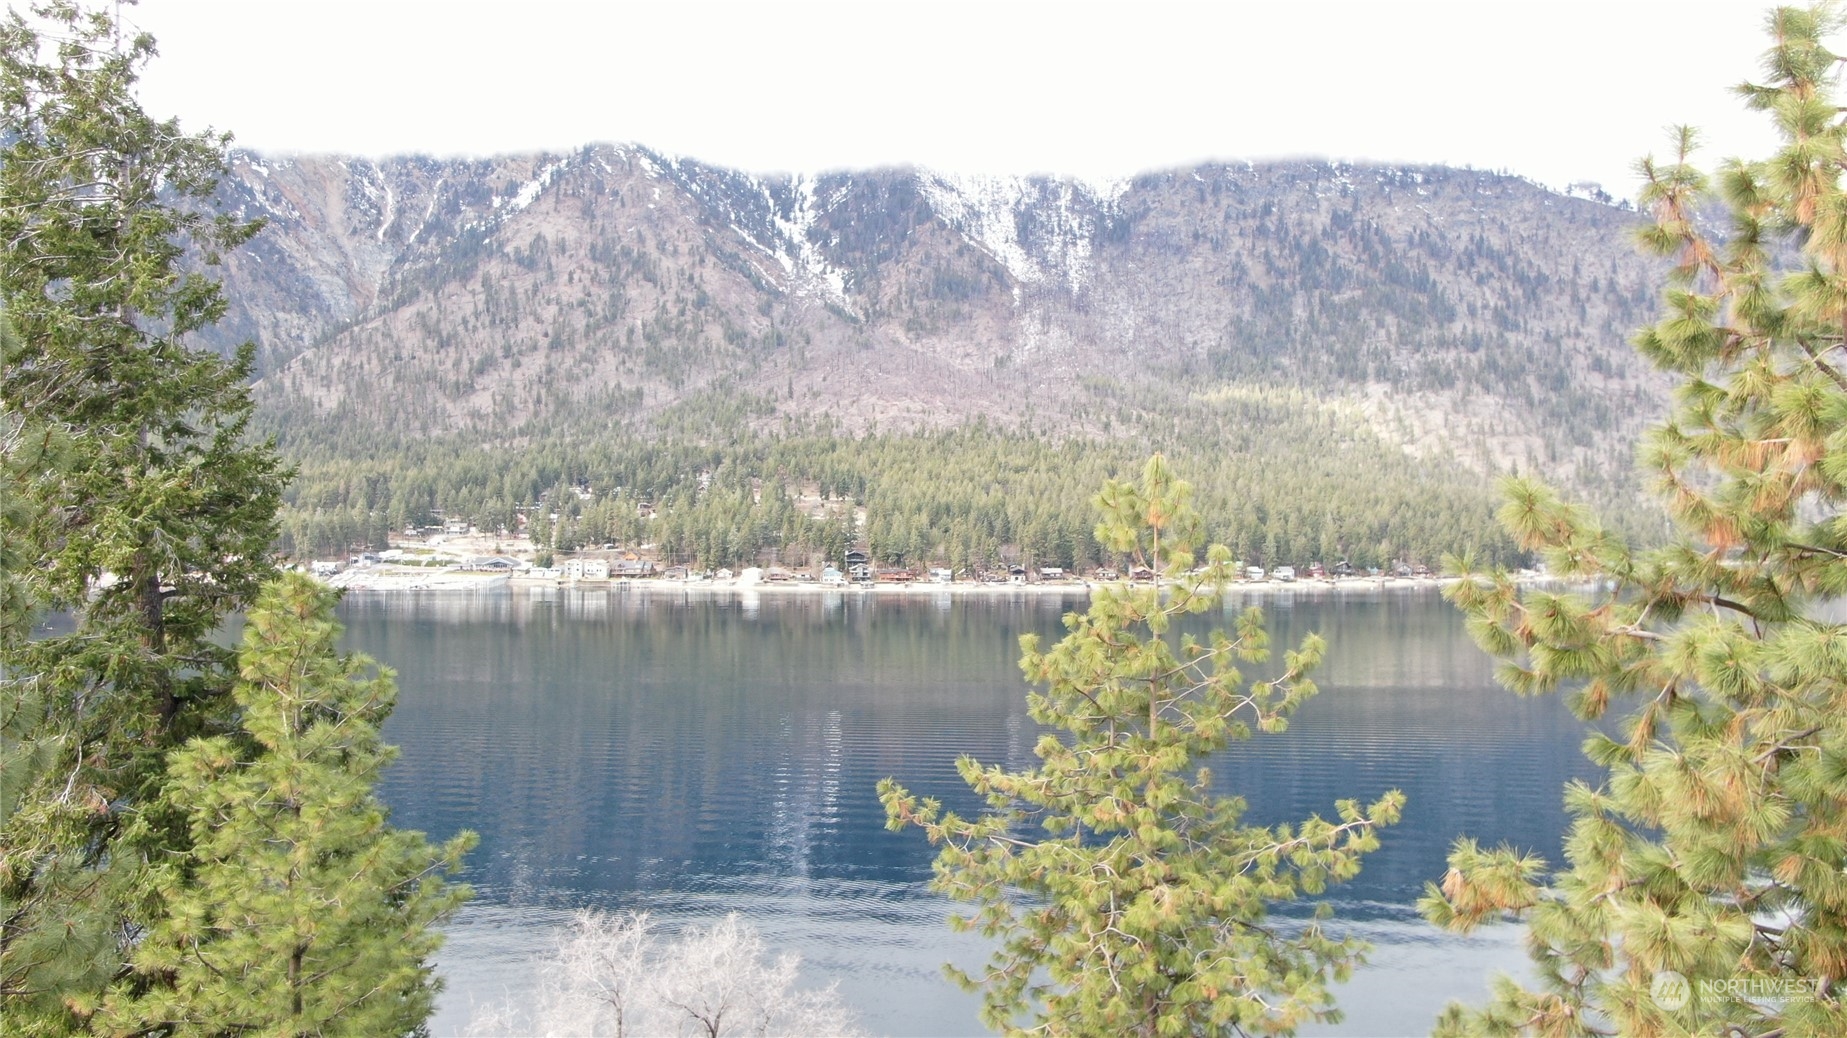 a view of a lake with a mountain in the background